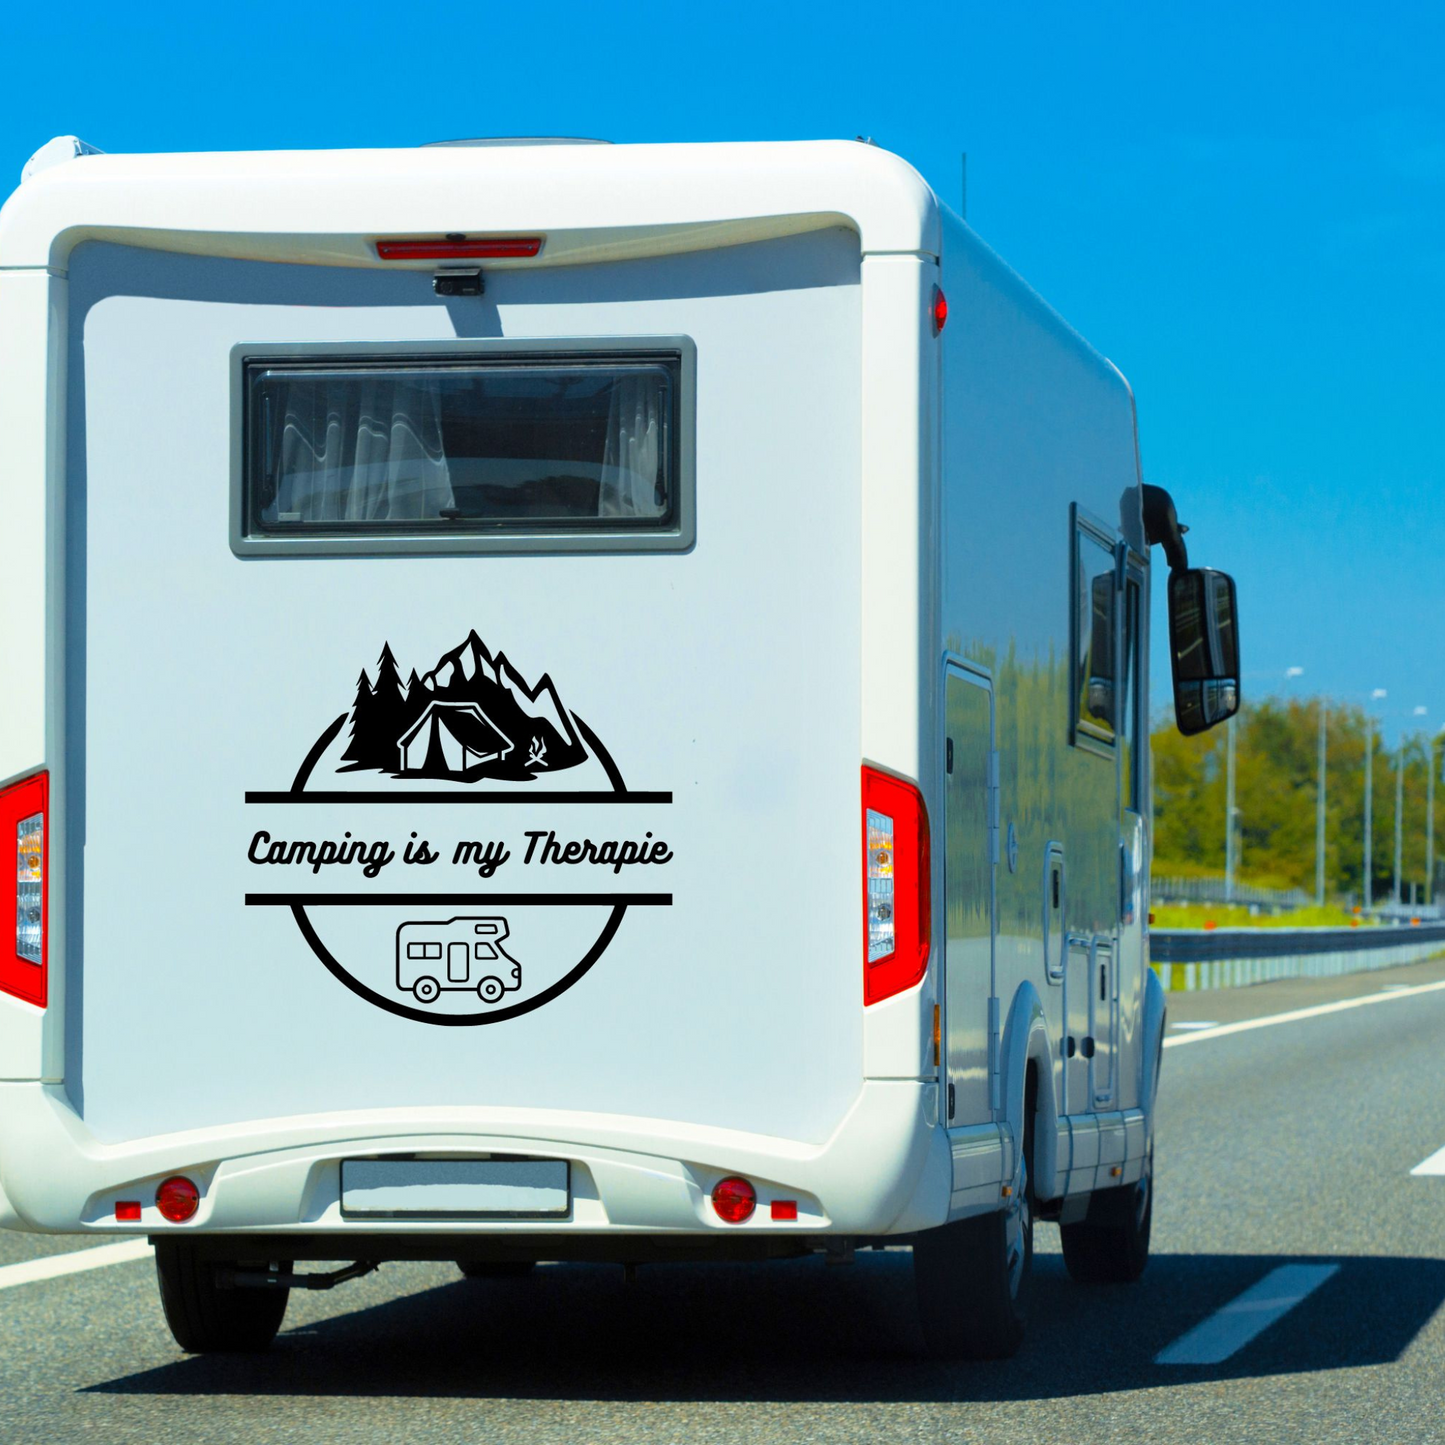 Autoaufkleber "Camping is my Therapie"